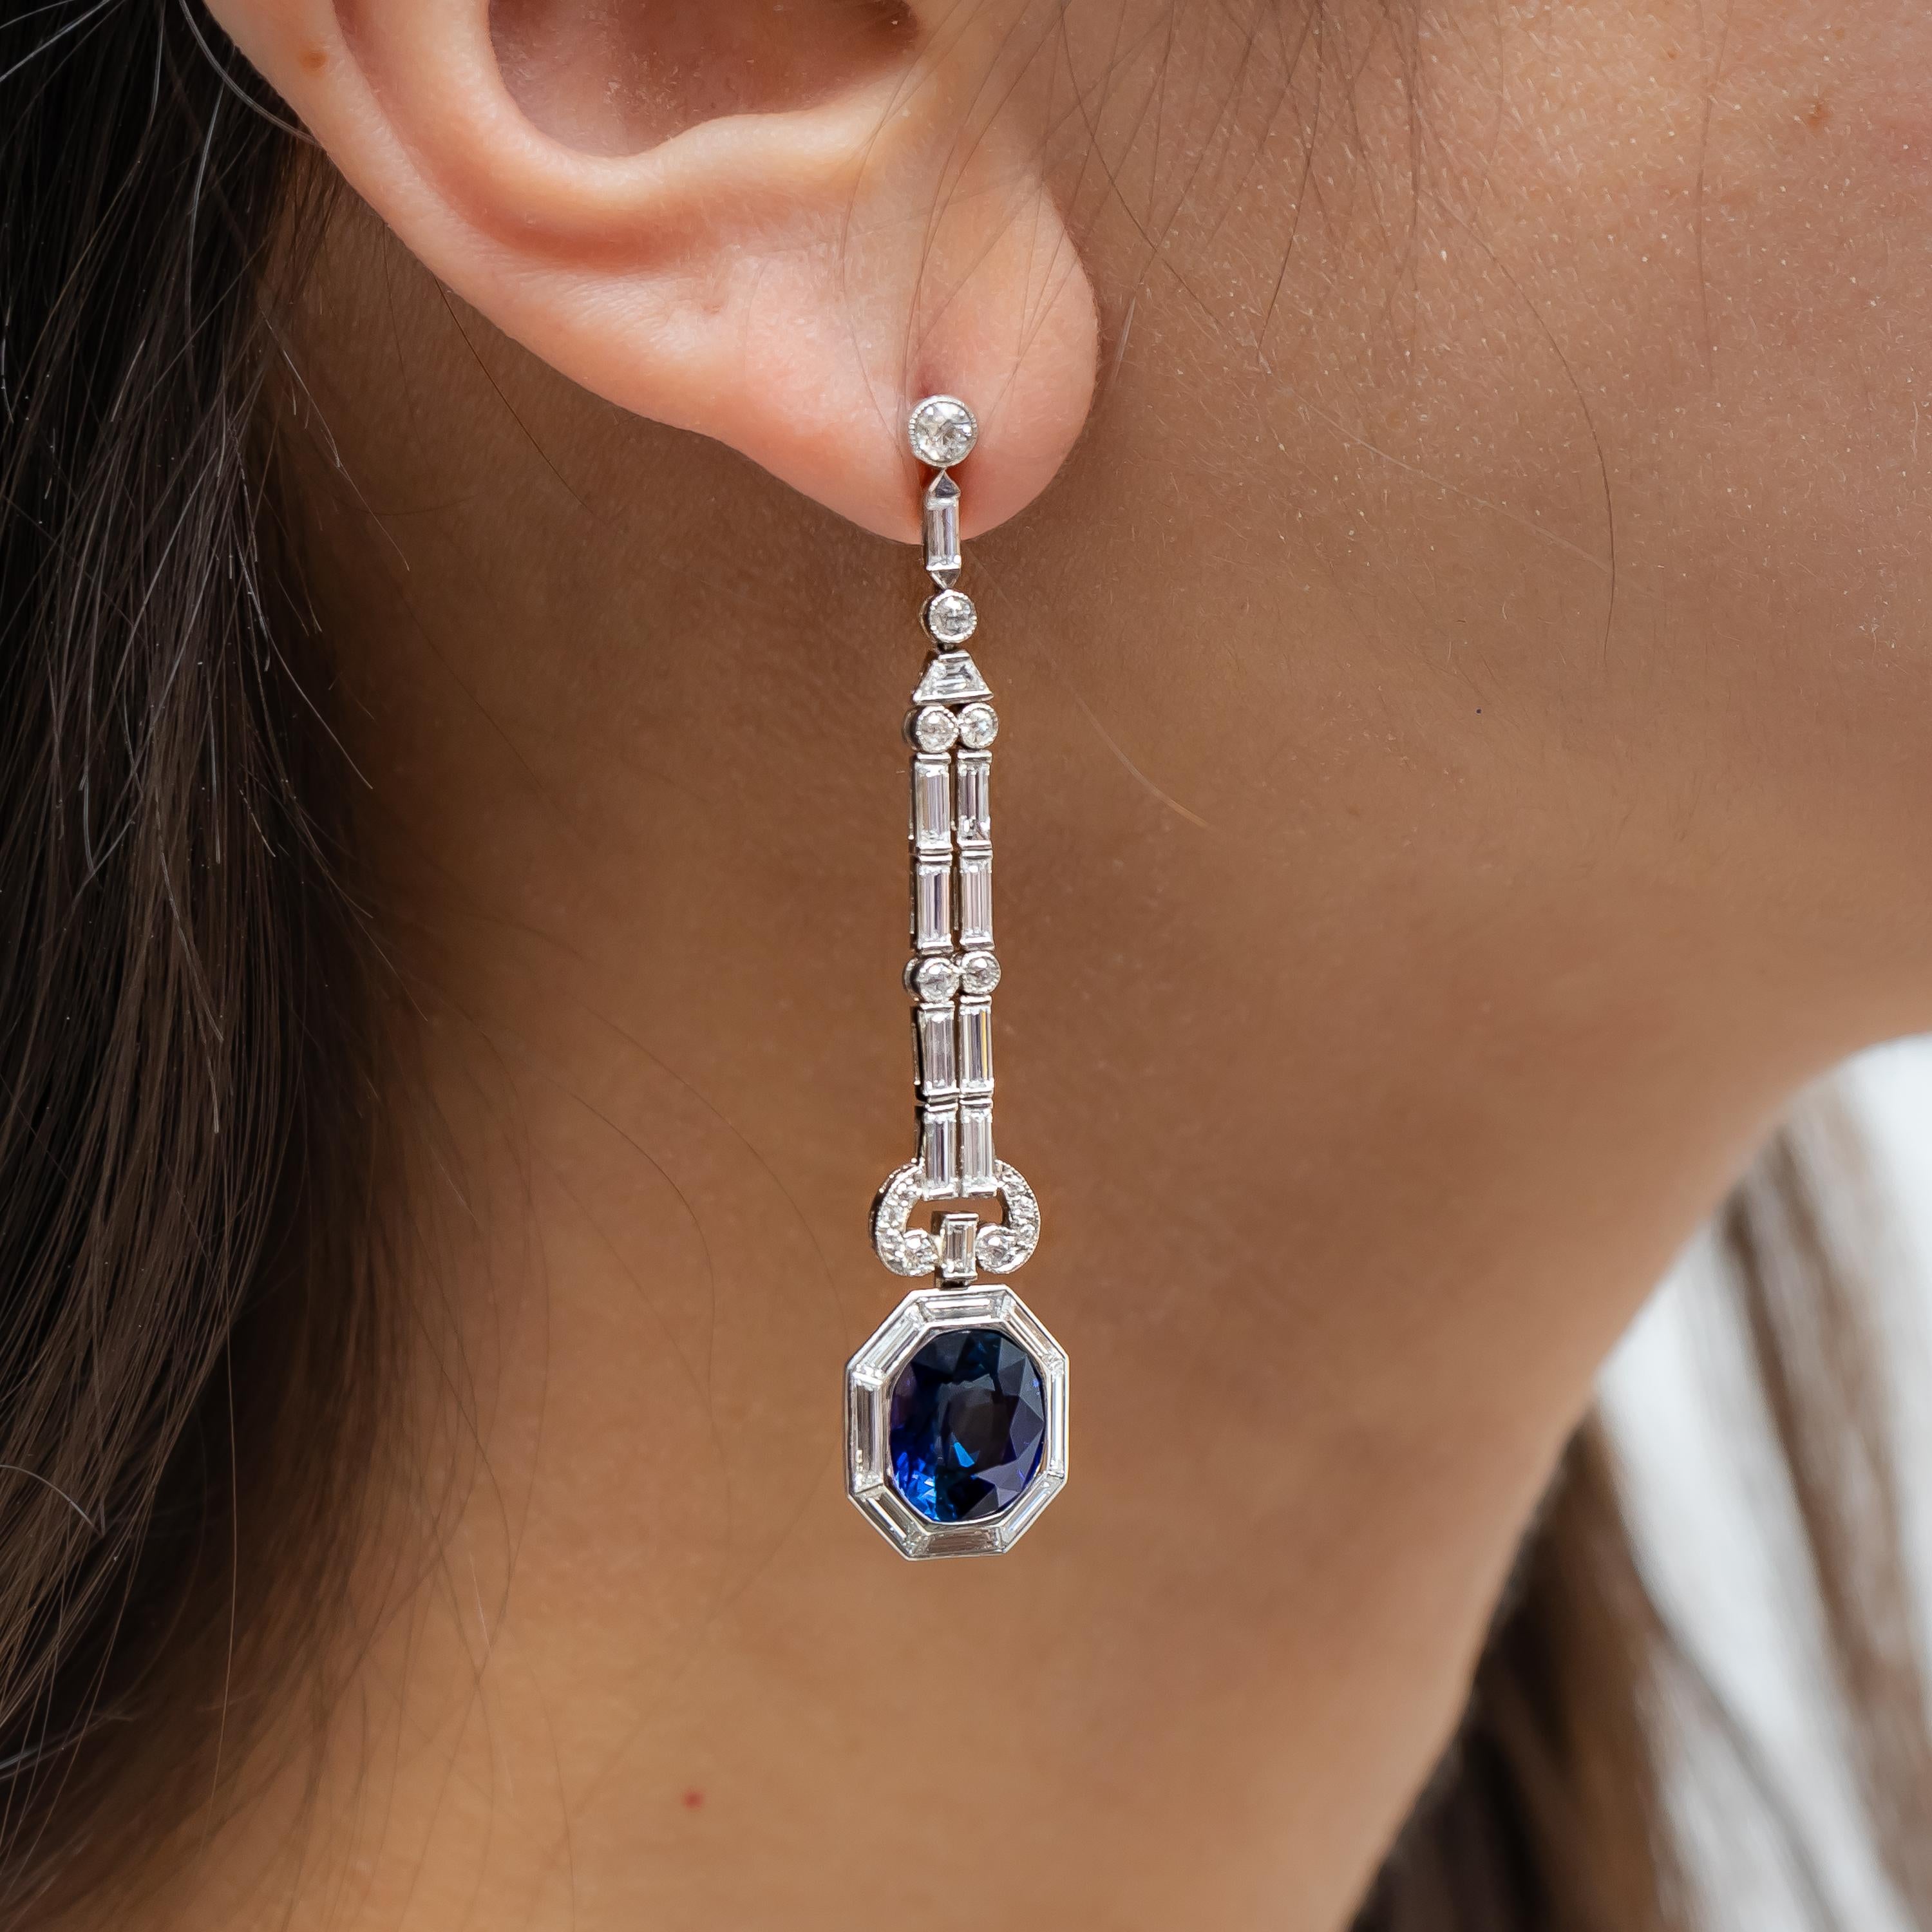 A pair of modern sapphire and diamond drop earrings, the top studs are set with old cut diamonds, with baguette-cut diamonds below and old-cut diamonds, above trapezoid diamonds, below this is a pendant of pairs of old-cut and baguette-cut diamonds,